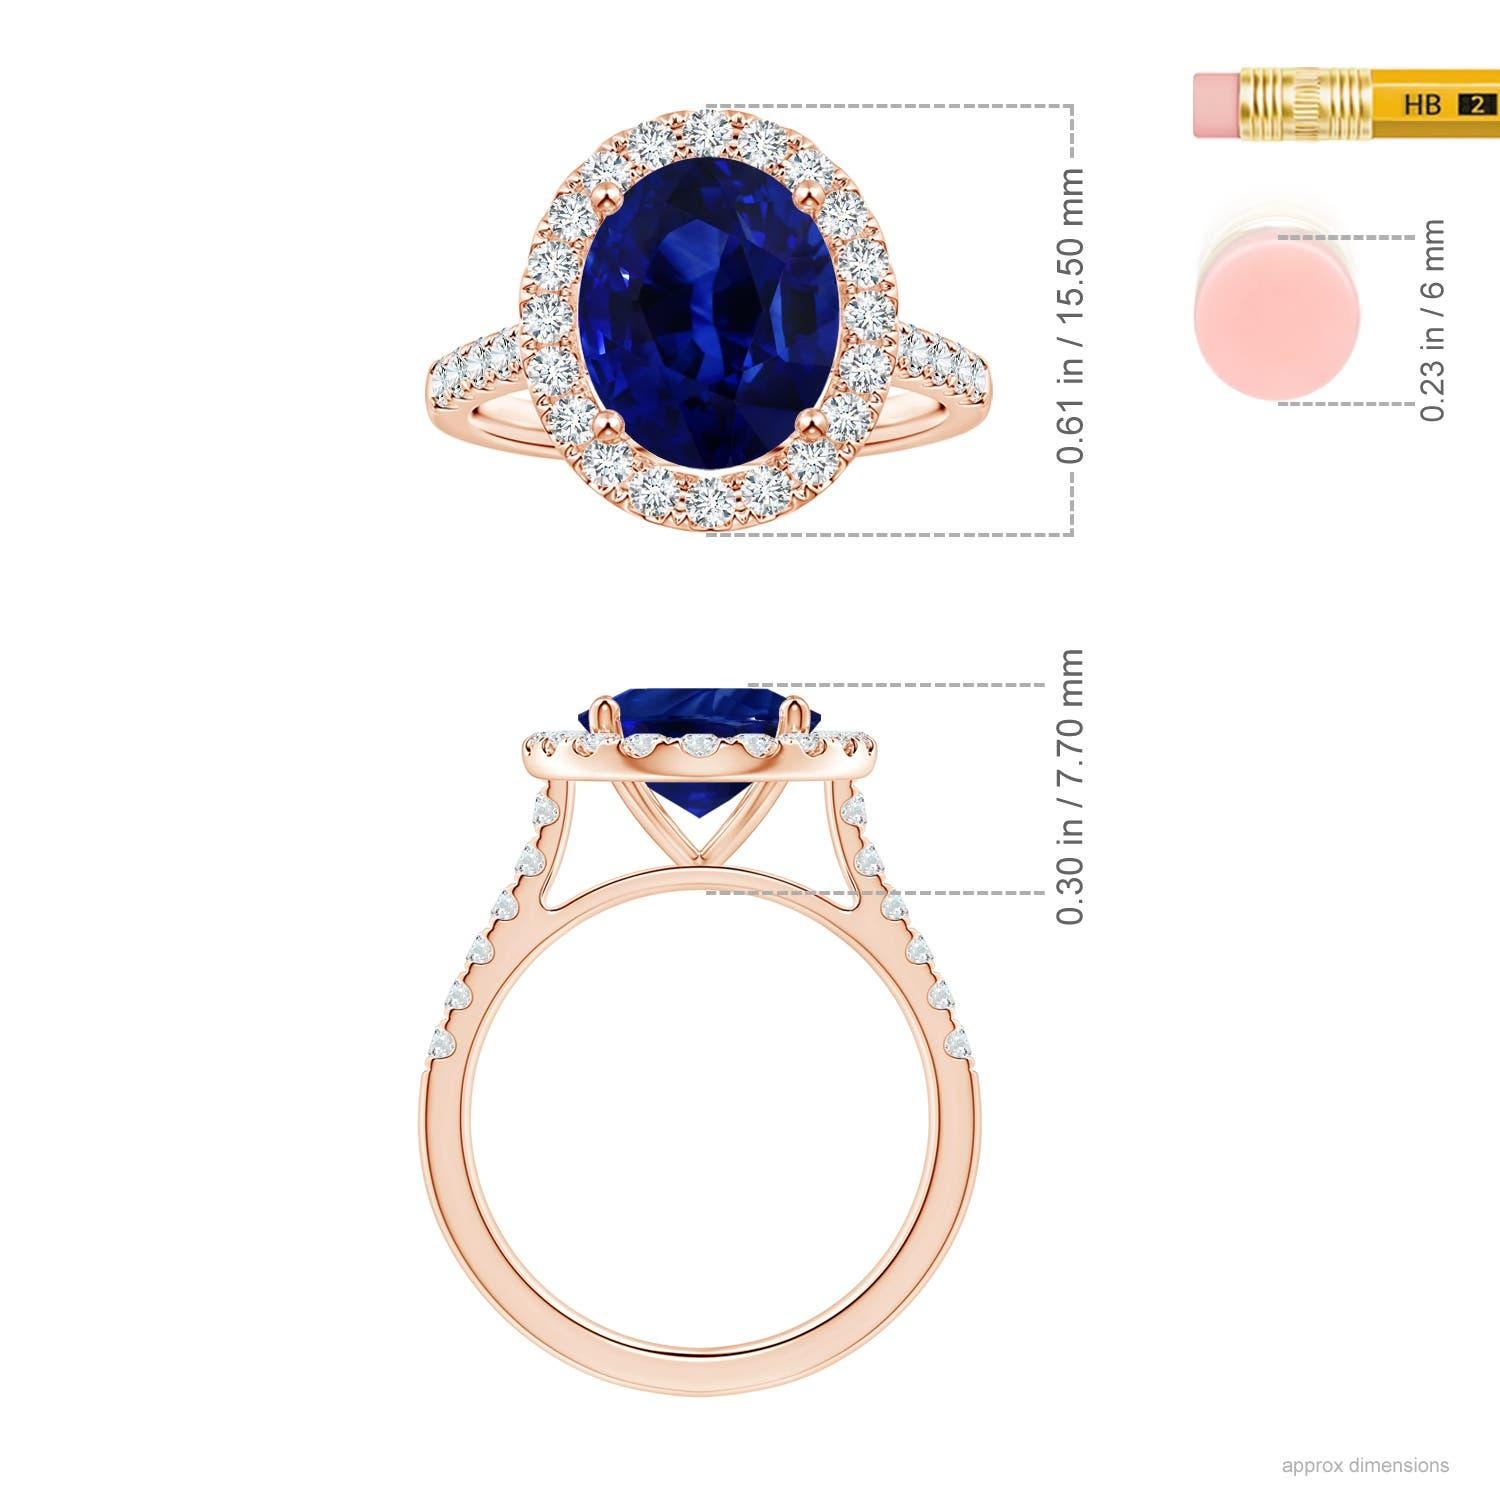 For Sale:  Angara Gia Certified Natural Blue Sapphire Halo Ring in Rose Gold with Diamonds 5